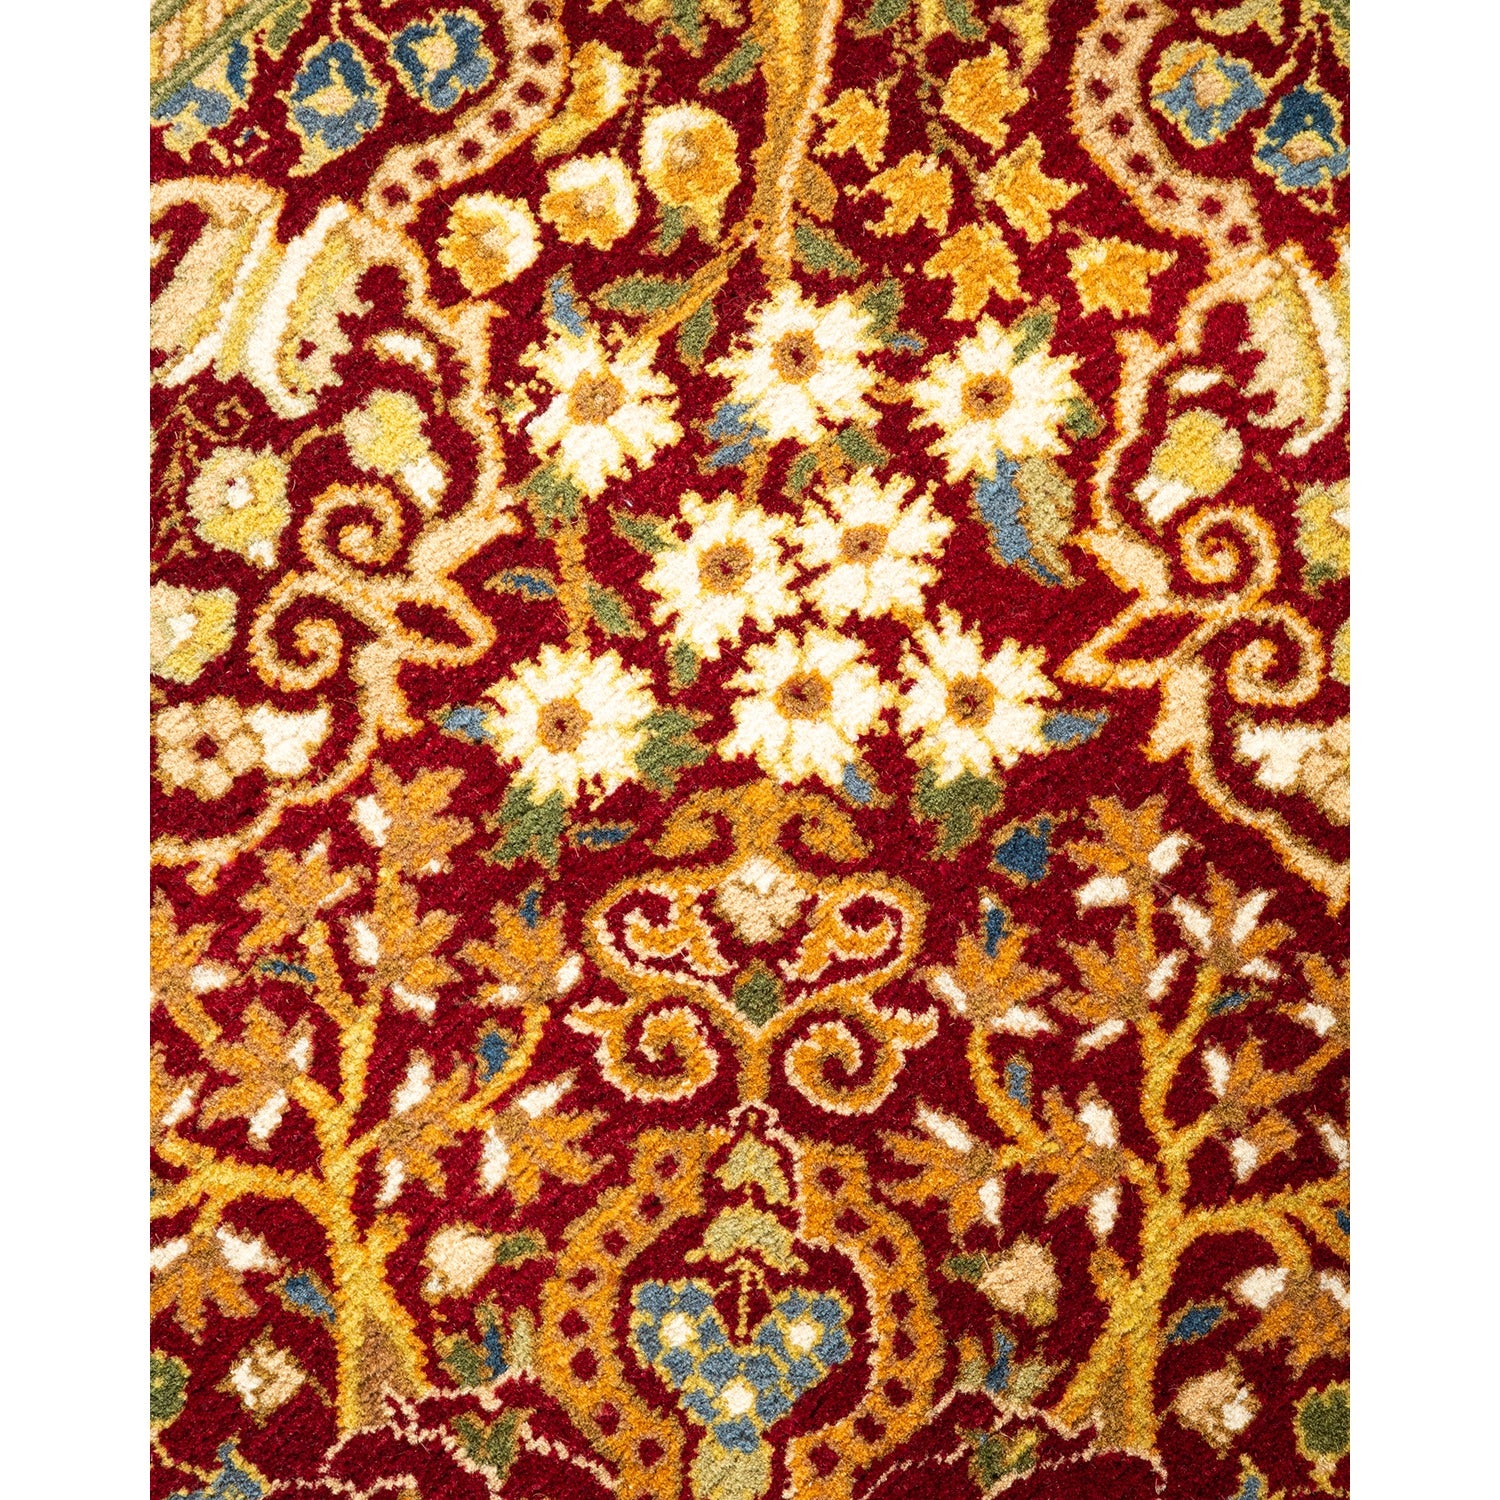 Intricate and ornate burgundy rug with gold, blue, and green details.